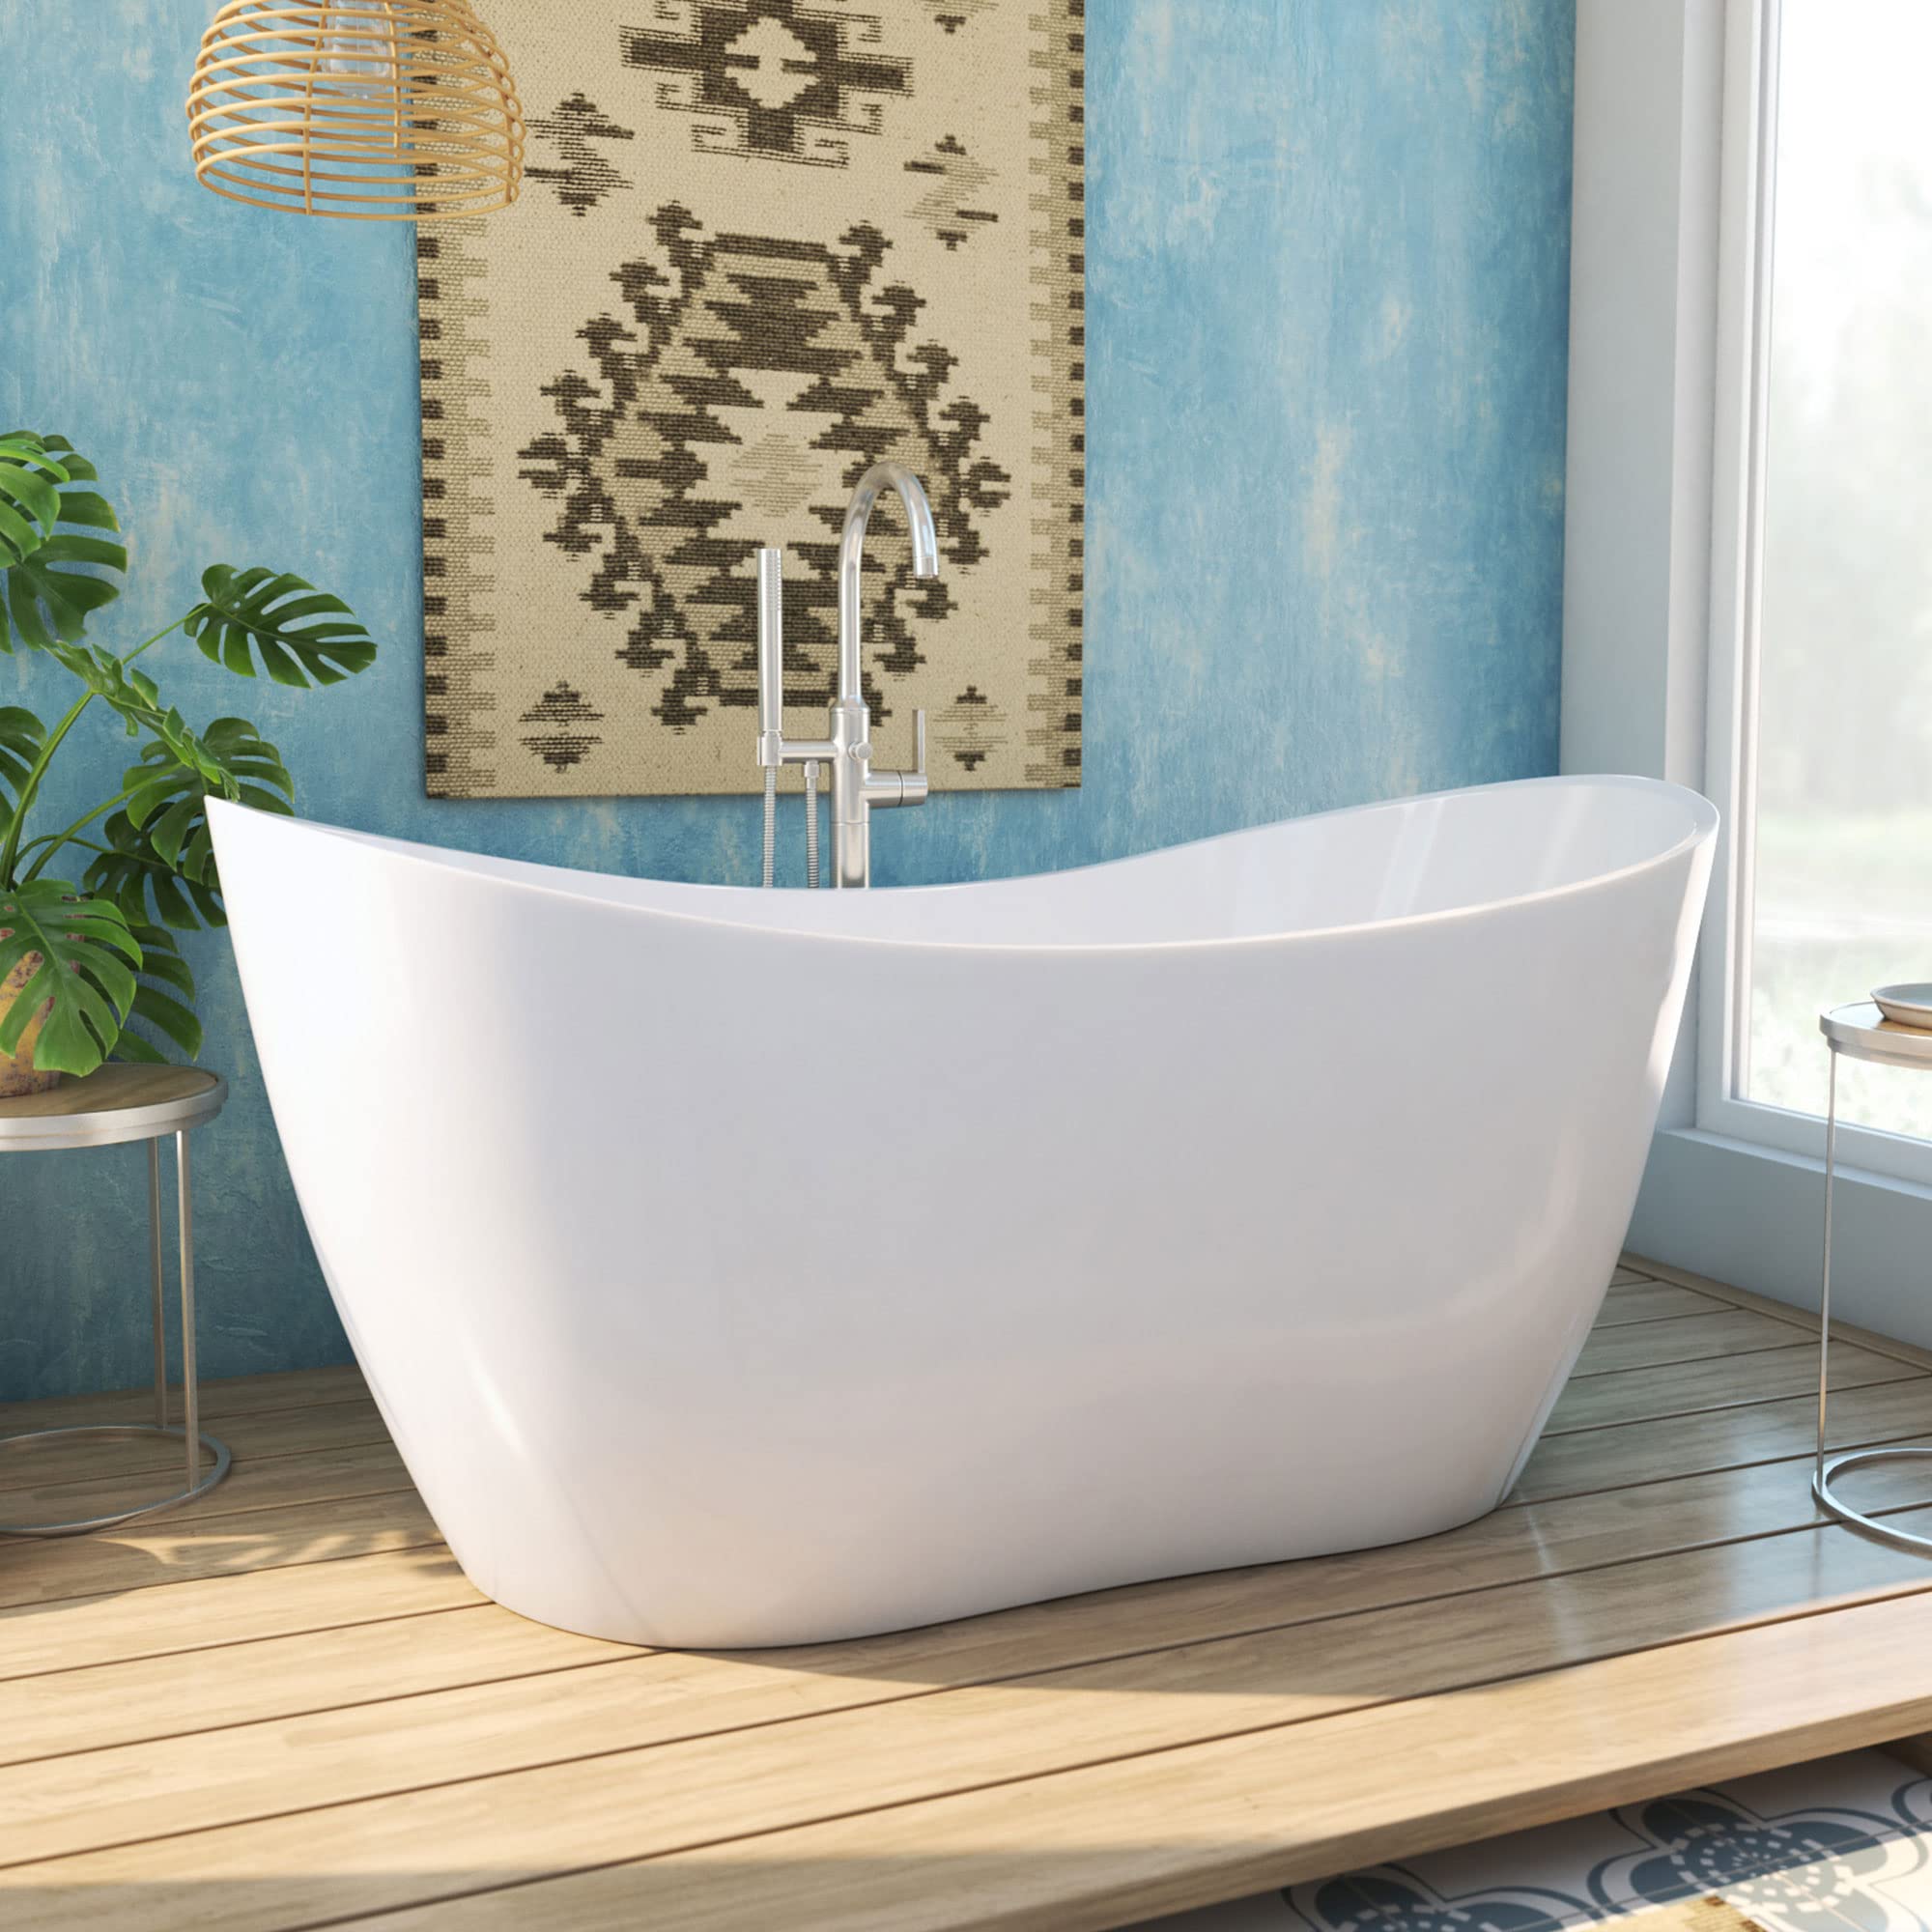 DreamLine Nile 59 in. L x 28 in. H Acrylic Freestanding Bathtub with Brushed Nickel Finish